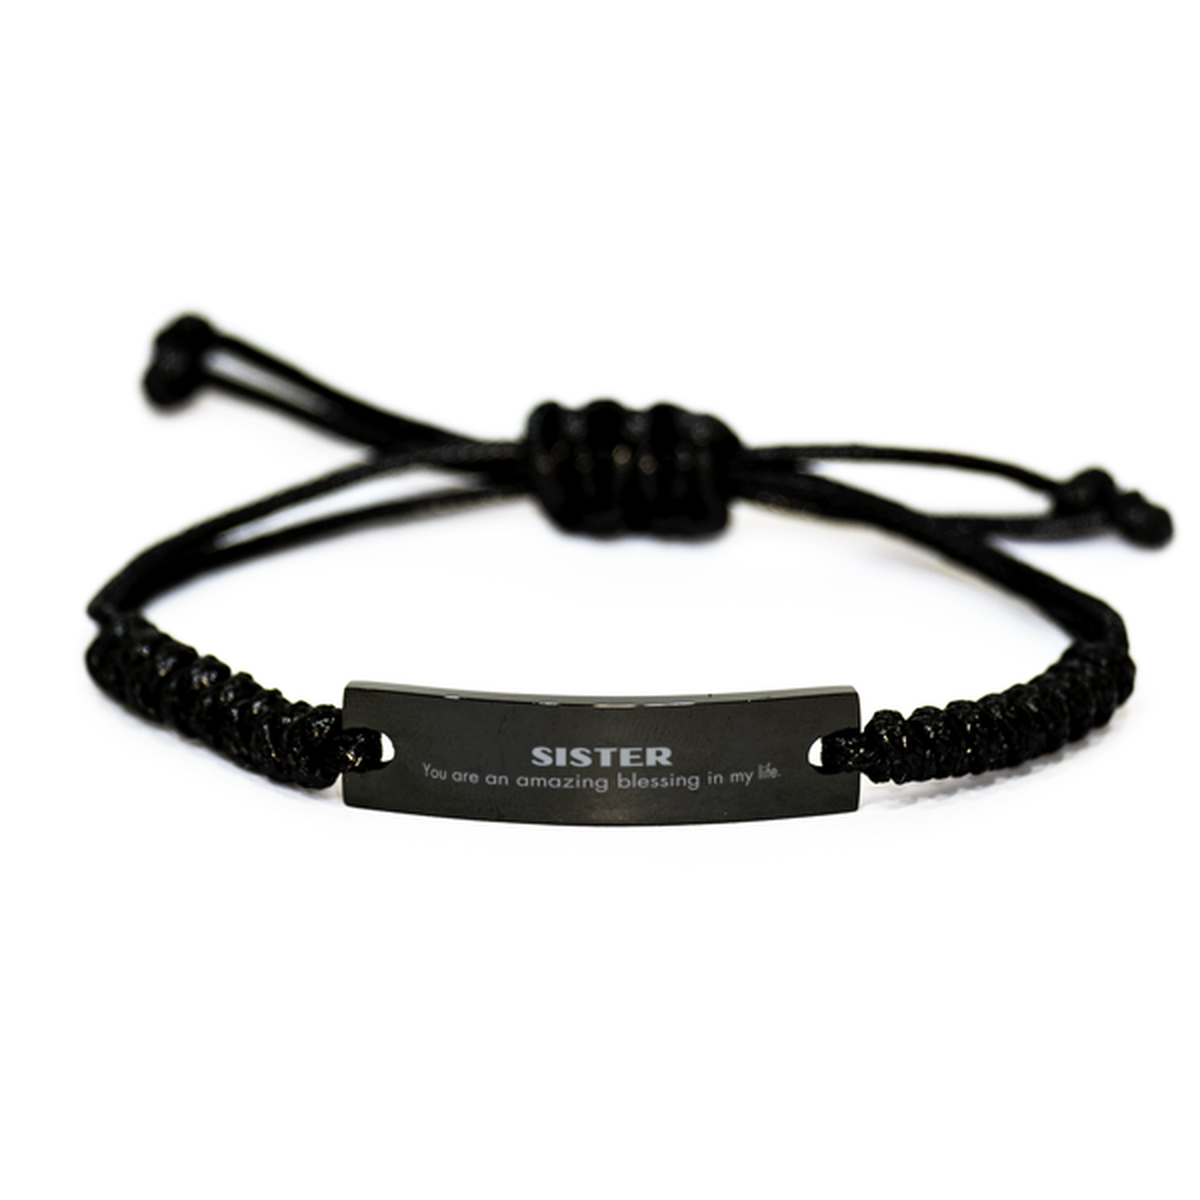 Sister Black Rope Bracelet, You are an amazing blessing in my life, Thank You Gifts For Sister, Inspirational Birthday Christmas Unique Gifts For Sister